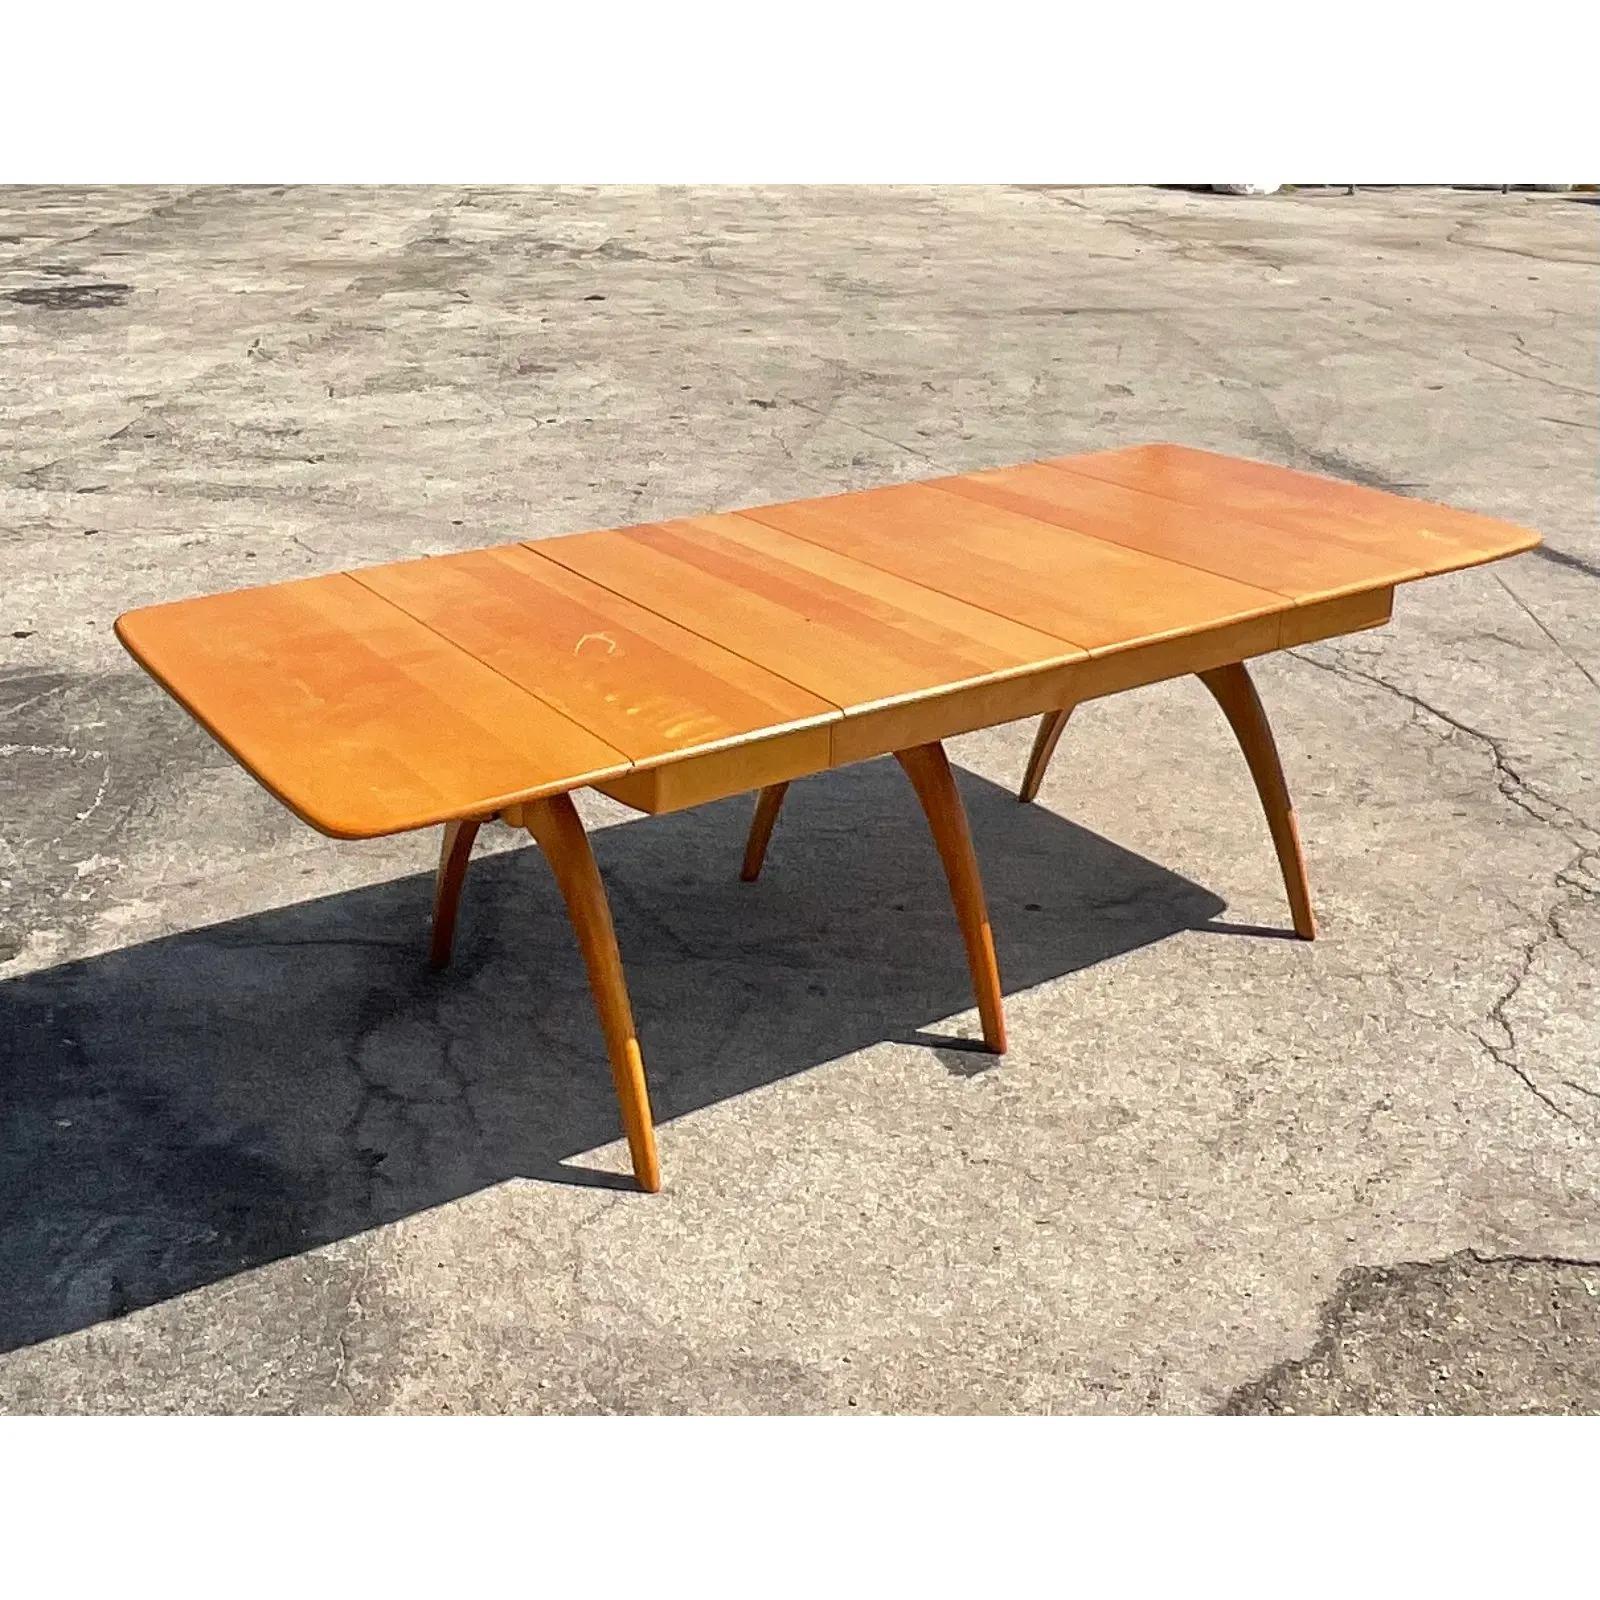 Fantastic vintage MCM dining table. Made by the iconic Heywood Wakefield. The coveted Wishbone shape with long slender legs. Acquired from a Palm Beach estate.